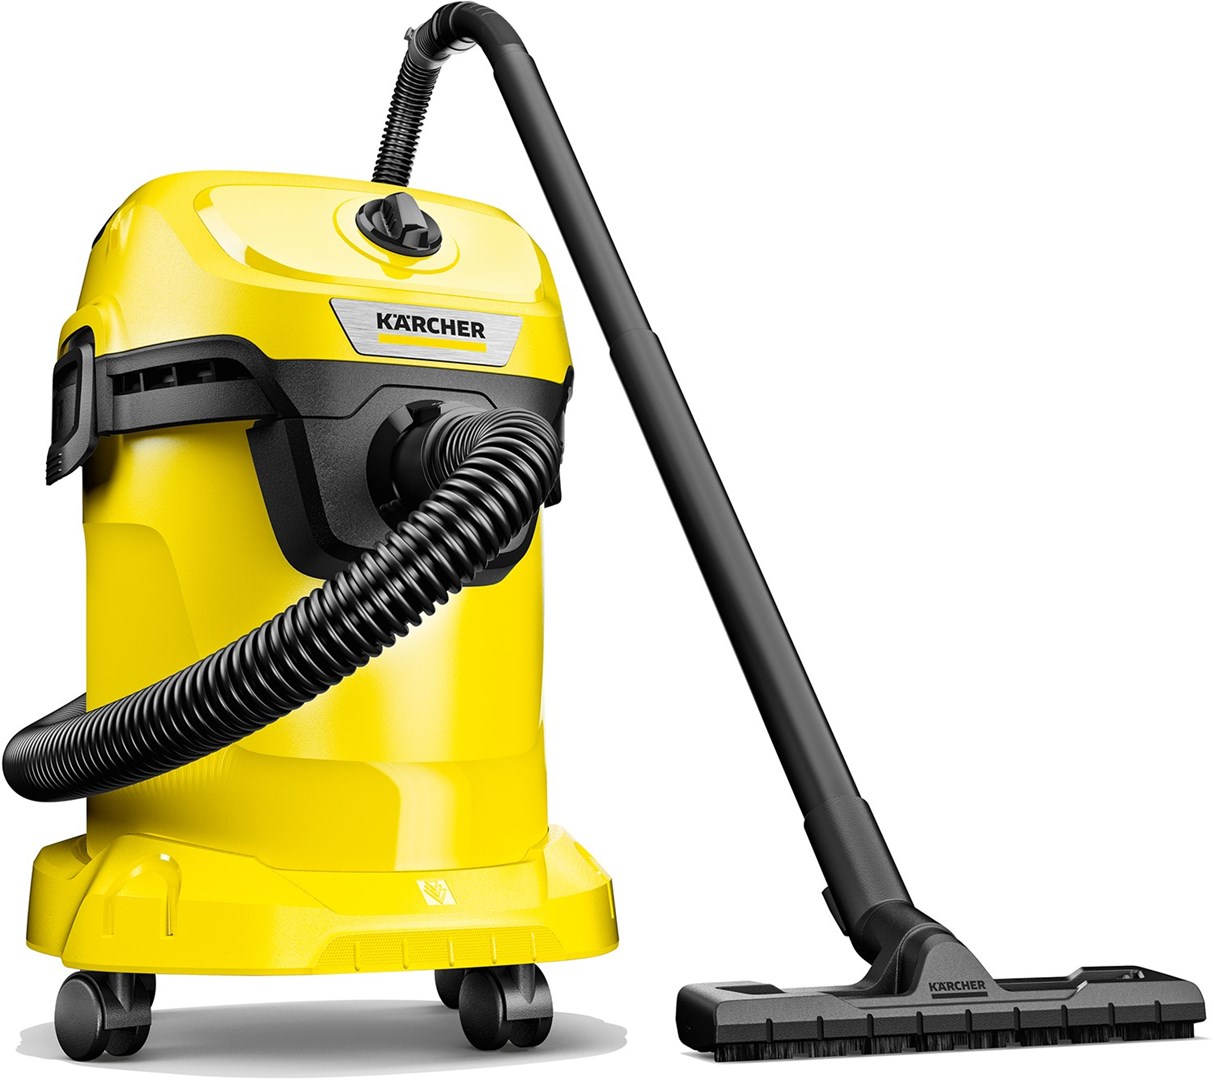 WD3-Premium-17L Wet & Dry Stainless Steel Karcher Vacuum Cleaner 2/4M 5.8KG  1400W 240V (rp1.629-840.0) 1.629-863.0 - Everything CSM